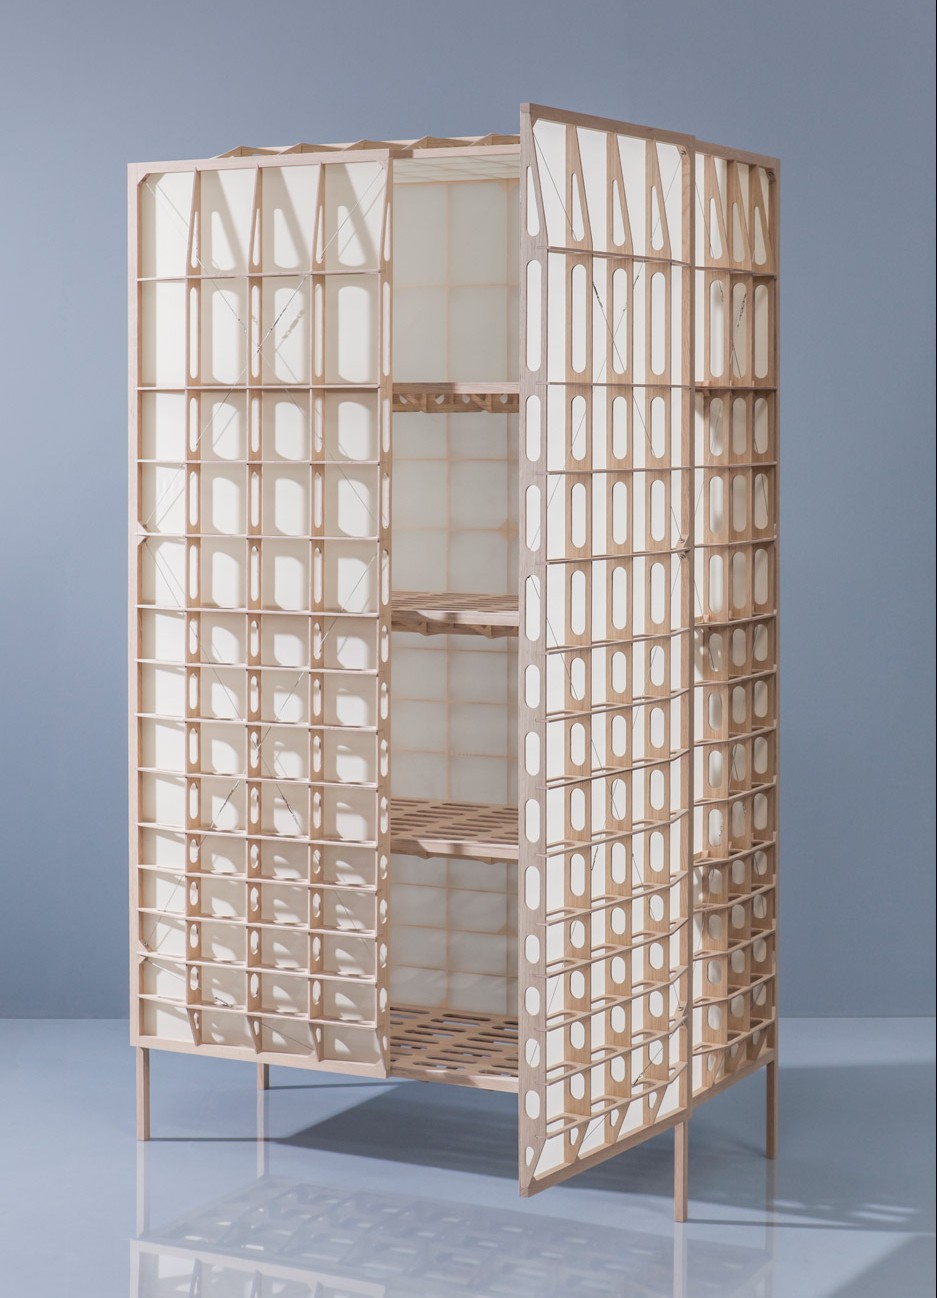 Mieke Meijer's Airframe 01 cabinet is based on early aeroplane design